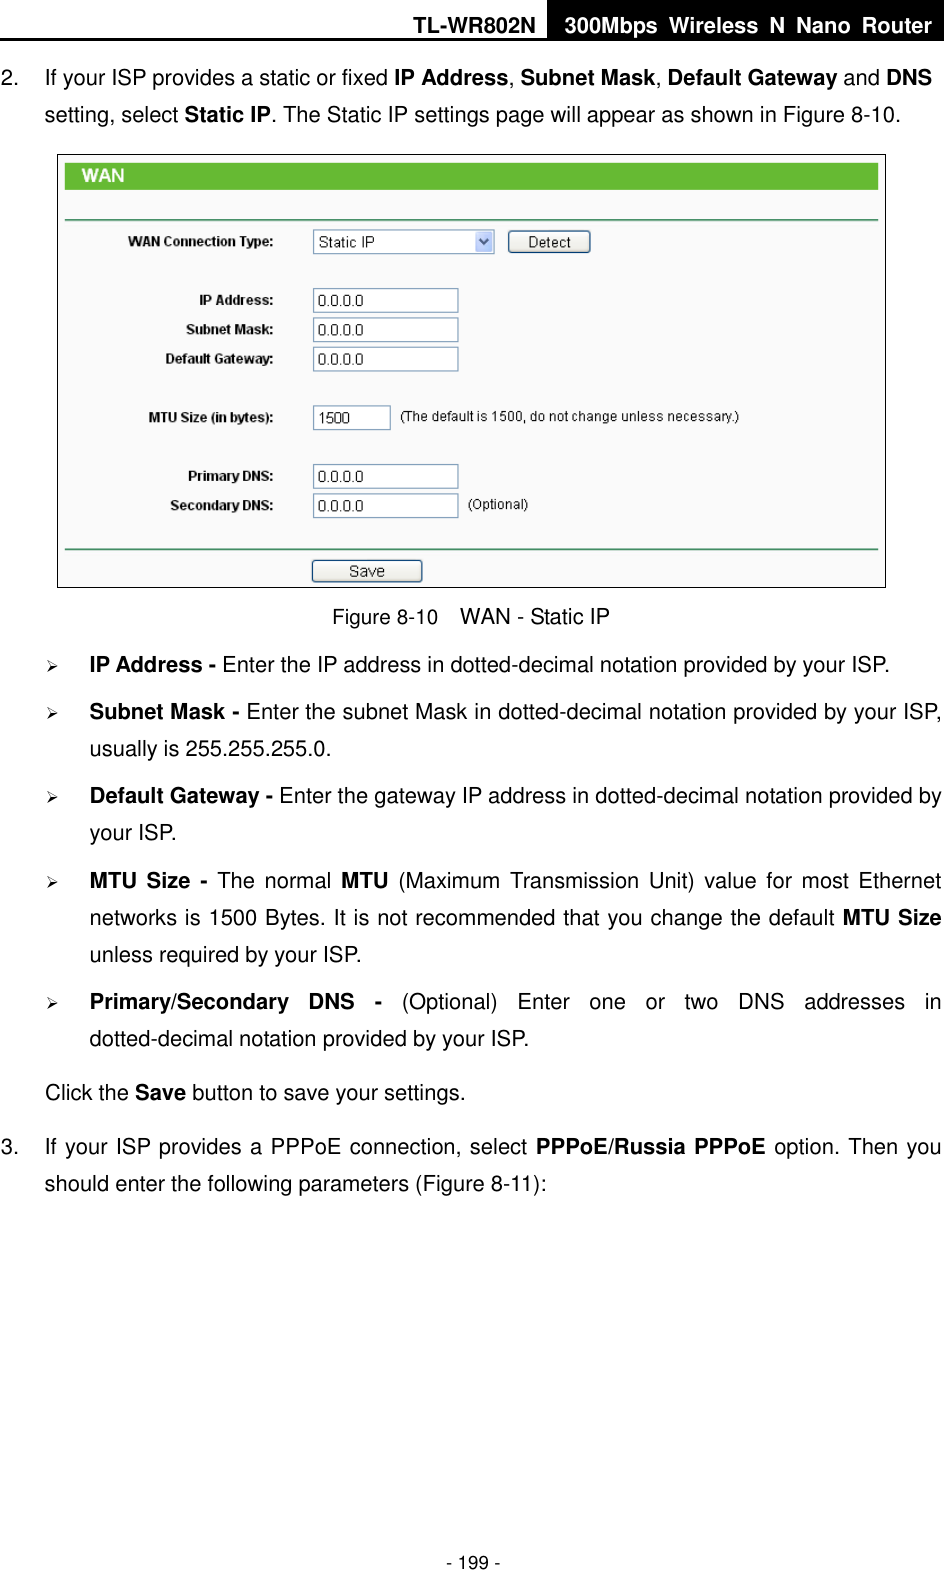 TL-WR802N 300Mbps  Wireless  N  Nano  Router  - 199 - 2.  If your ISP provides a static or fixed IP Address, Subnet Mask, Default Gateway and DNS setting, select Static IP. The Static IP settings page will appear as shown in Figure 8-10.  Figure 8-10  WAN - Static IP  IP Address - Enter the IP address in dotted-decimal notation provided by your ISP.  Subnet Mask - Enter the subnet Mask in dotted-decimal notation provided by your ISP, usually is 255.255.255.0.  Default Gateway - Enter the gateway IP address in dotted-decimal notation provided by your ISP.  MTU Size -  The  normal MTU (Maximum  Transmission Unit) value for most  Ethernet networks is 1500 Bytes. It is not recommended that you change the default MTU Size unless required by your ISP.    Primary/Secondary  DNS  -  (Optional)  Enter  one  or  two  DNS  addresses  in dotted-decimal notation provided by your ISP. Click the Save button to save your settings. 3.  If your ISP provides a PPPoE connection, select PPPoE/Russia PPPoE option. Then you should enter the following parameters (Figure 8-11): 